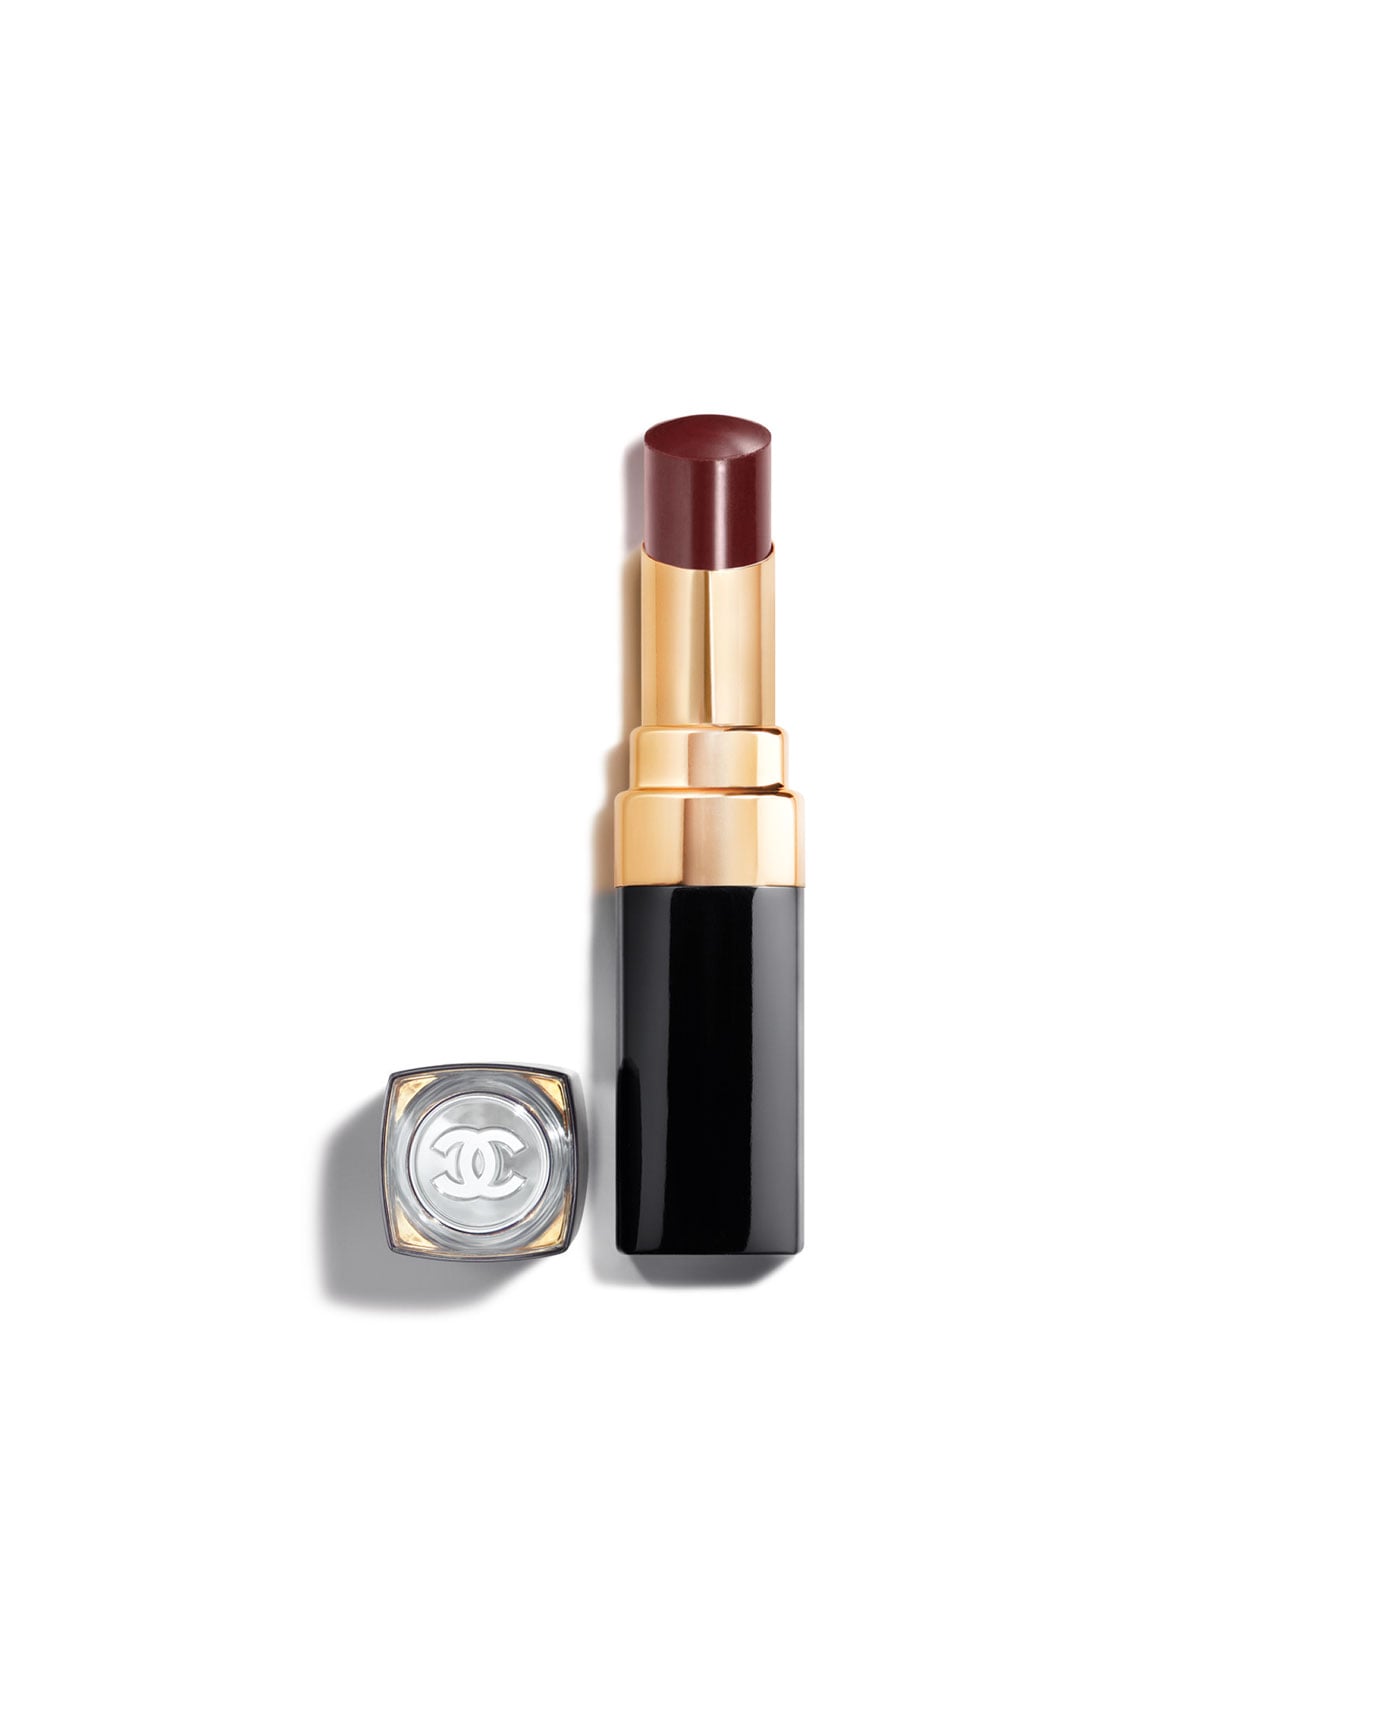 Chanel Coco Flash in Noir Moderne | The Dark Lipsticks to Wear This Fall and Beyond | POPSUGAR Photo 7